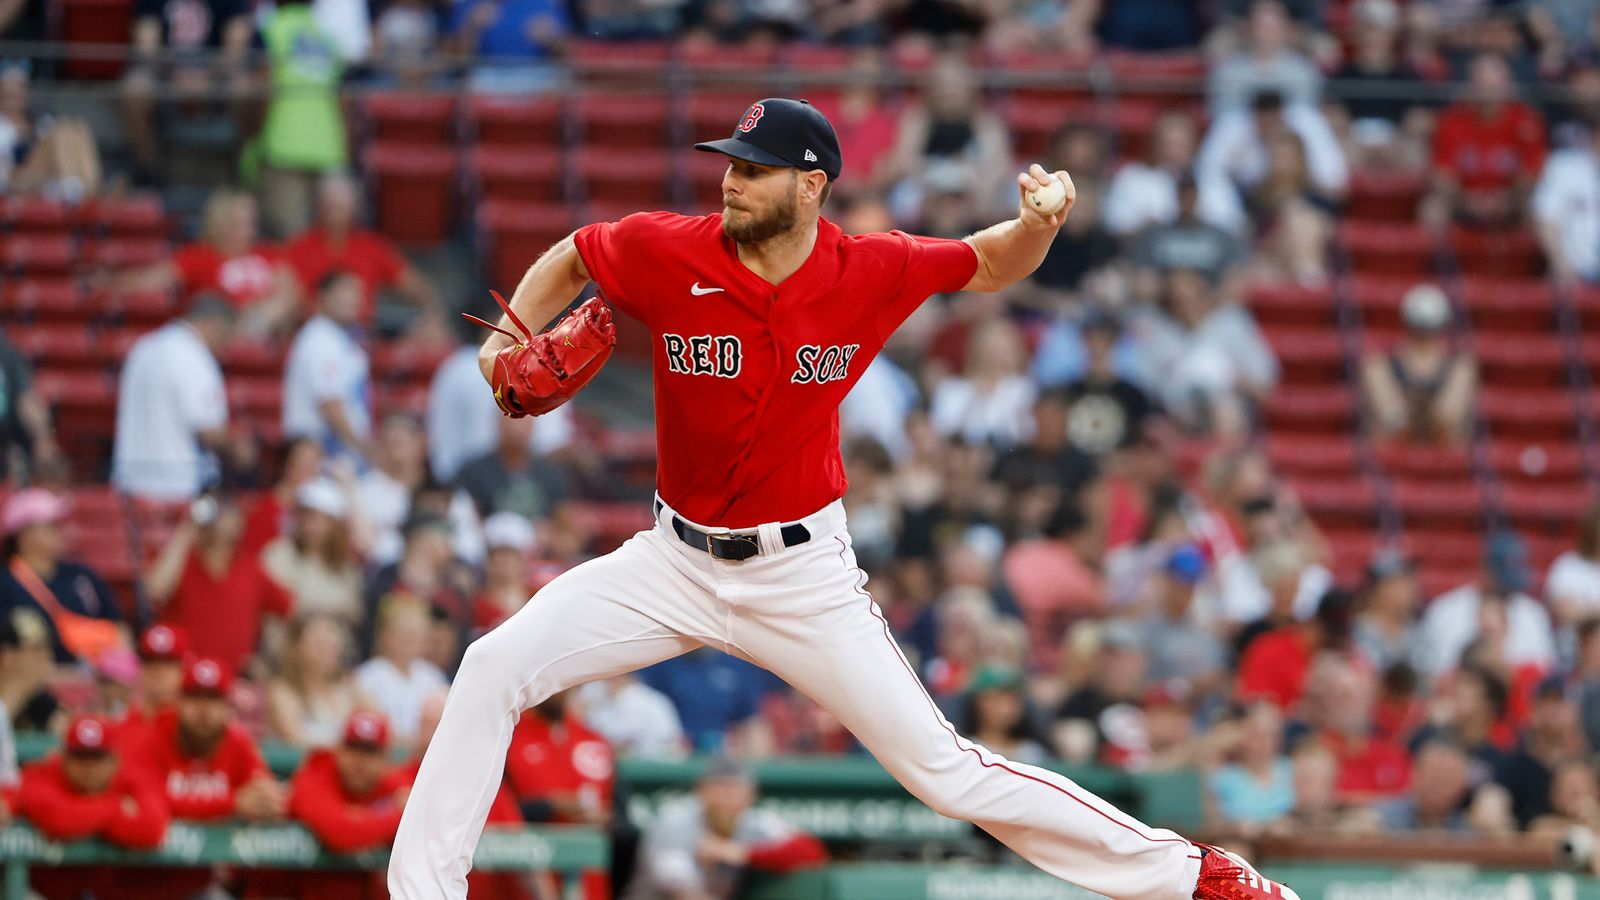 BSJ Live Coverage: Tigers at Red Sox, 7:10 p.m. - Chris Sale returns